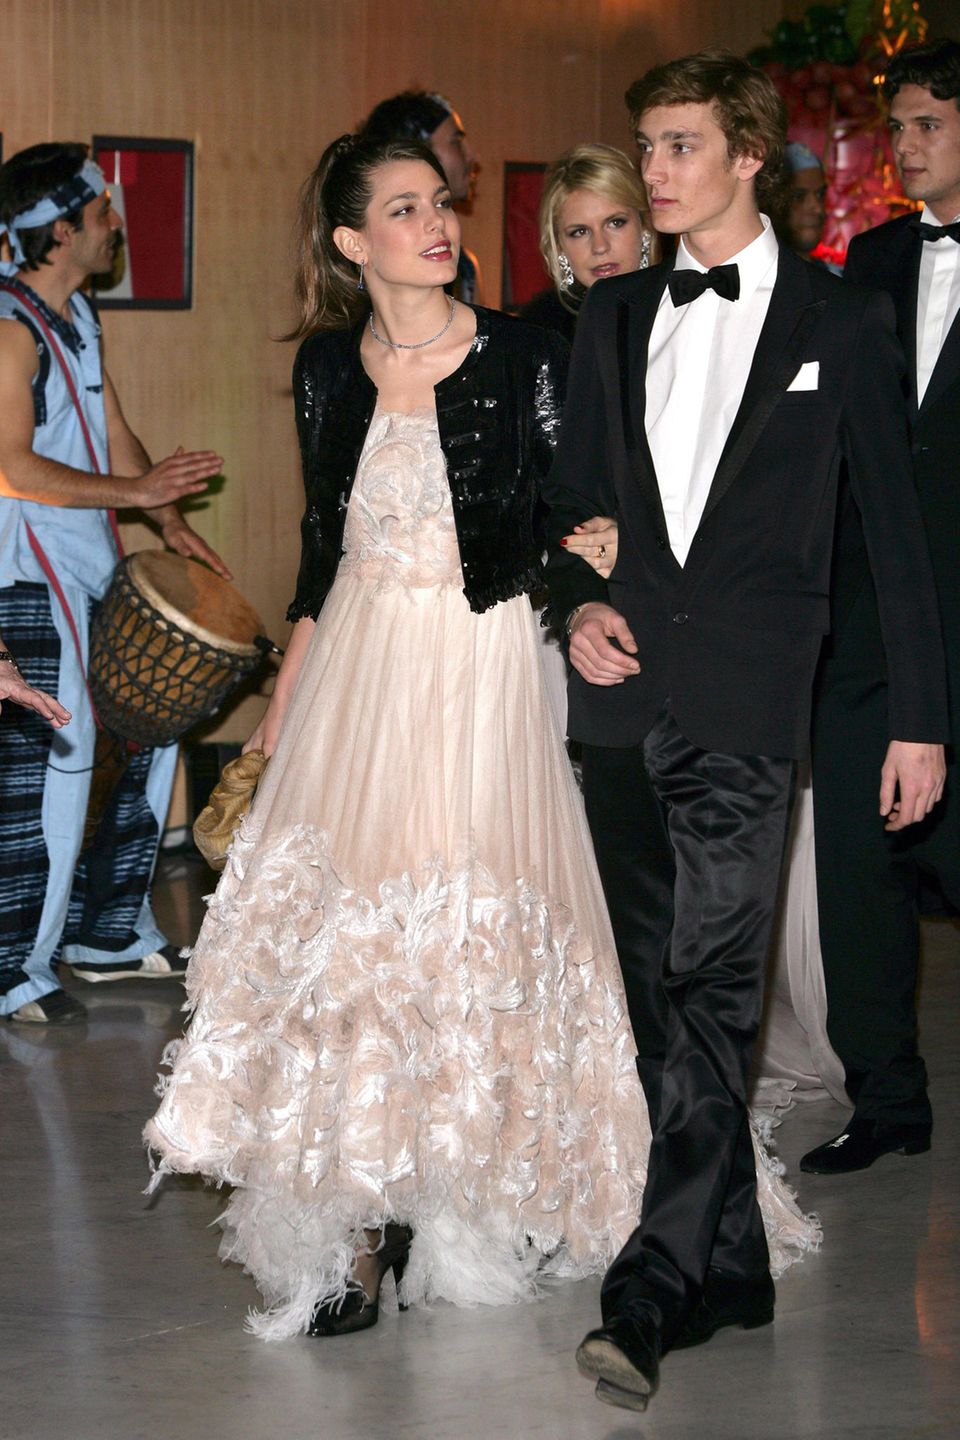 Charlotte and Pierre Casiraghi on March 25, 2006.